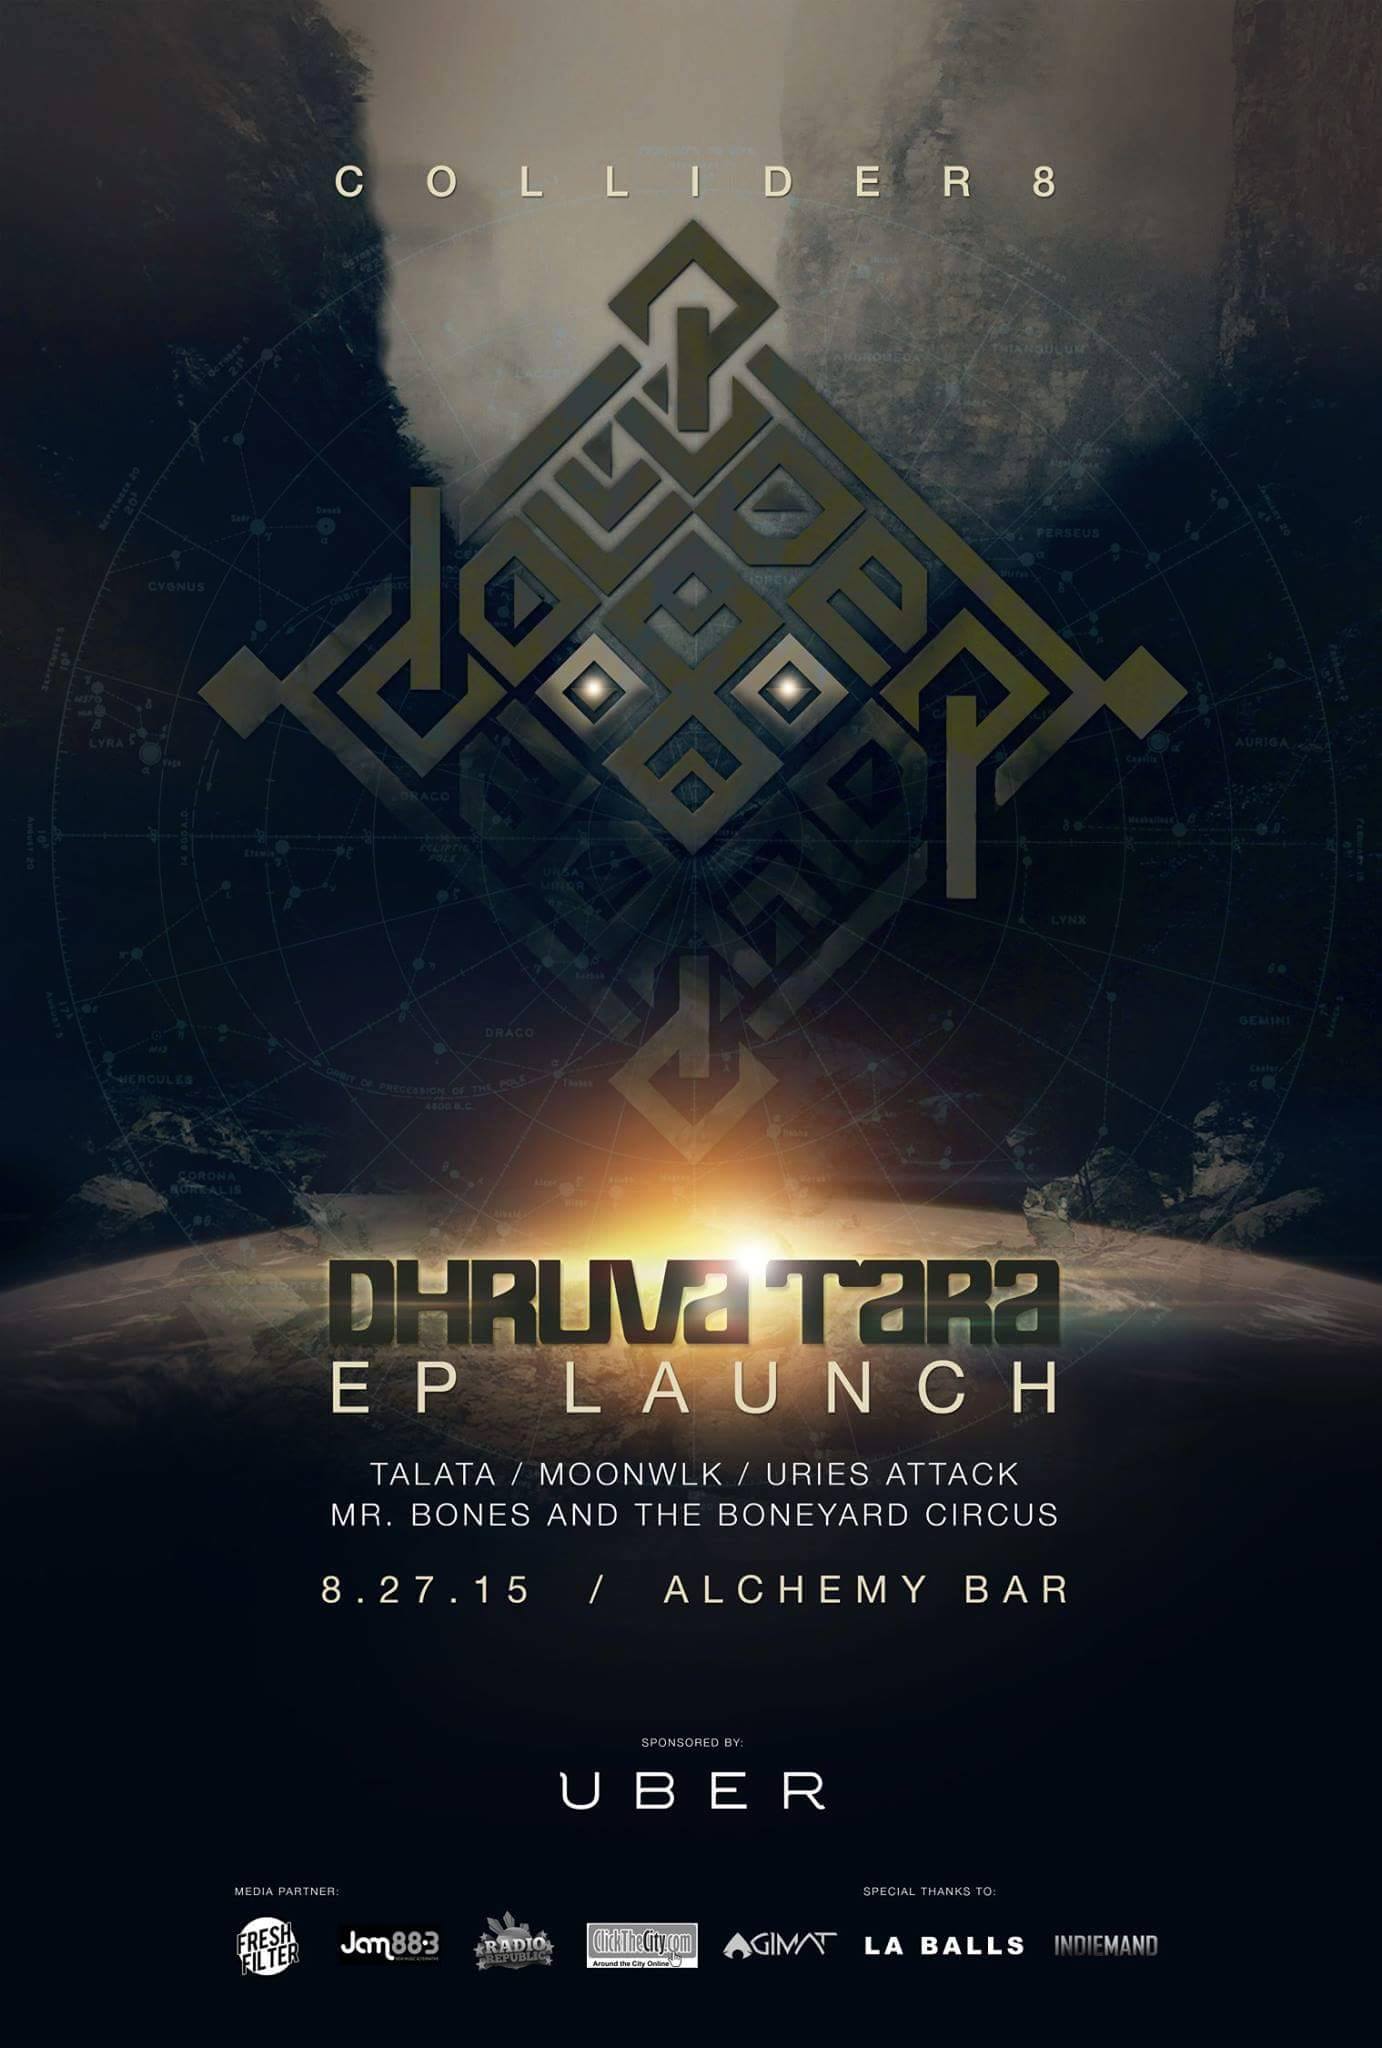 Dhruva Tara EP Launch | Collider 8     Thursday, August 27     at 8:00pm     	     Show Map     Alchemy Bistro Bar     Cor Polaris St. and Durban St., Barangay Poblacion, Makati. From Makati Ave turn right onto Jupiter St. then first left onto Polaris. we are at the intersection with Durban St., 1227 Makati     	     Invited by Axel-Herold Cristobal Vito Cruz VENUE: Alchemy Bistro Bar DOOR CHARGE: P300 incl. Drink Stub, Collider8 EP, DT Comics TIME: 8.00PM UBER Manila Promo Code: DHRUVATARA (Will be activated on the 27th) BANDS: - Dhruva Tara - Mr. Bones and The Boneyard Circus - Talata - Moonwlk - Urie's Attack ---------------------------------------------- Dhruva Tara is: - Frederick Mantilla - Axel-Herold Cristobal Vito Cruz - Gianne Garcia - Kiddo Gvevarra - Brian Lotho - Julius Dumlao Check out our social media pages for more updates: https://www.facebook.com/dhruvatara https://twitter.com/dhruva_tara https://instagram.com/dhruvataramusic #Collider8 #DhruvaTara #TeamDT